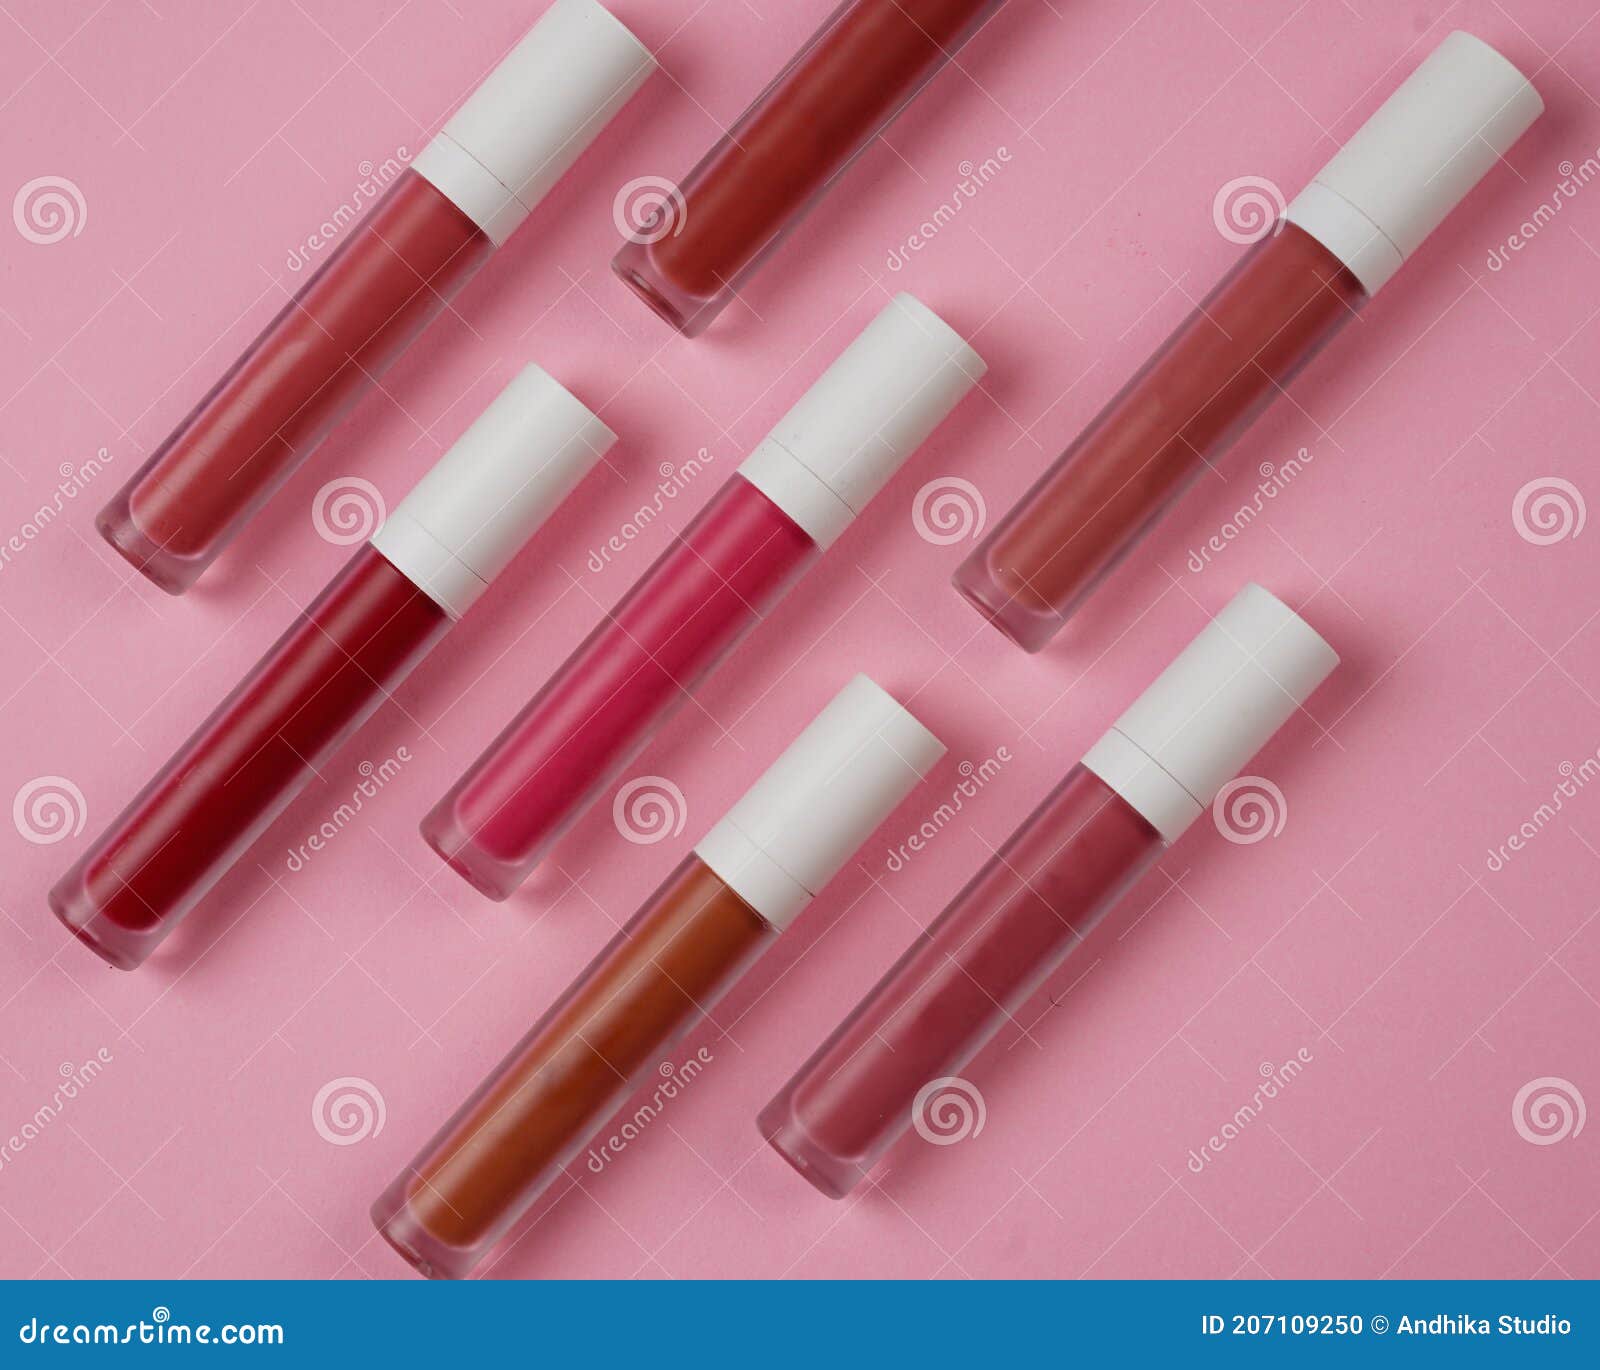 Download Liquid Lipstick Lip Gloss In Elegant Glass Bottle With White Lid Trendy Colors Of The Season Stock Photo Image Of Texture Cosmetic 207109250